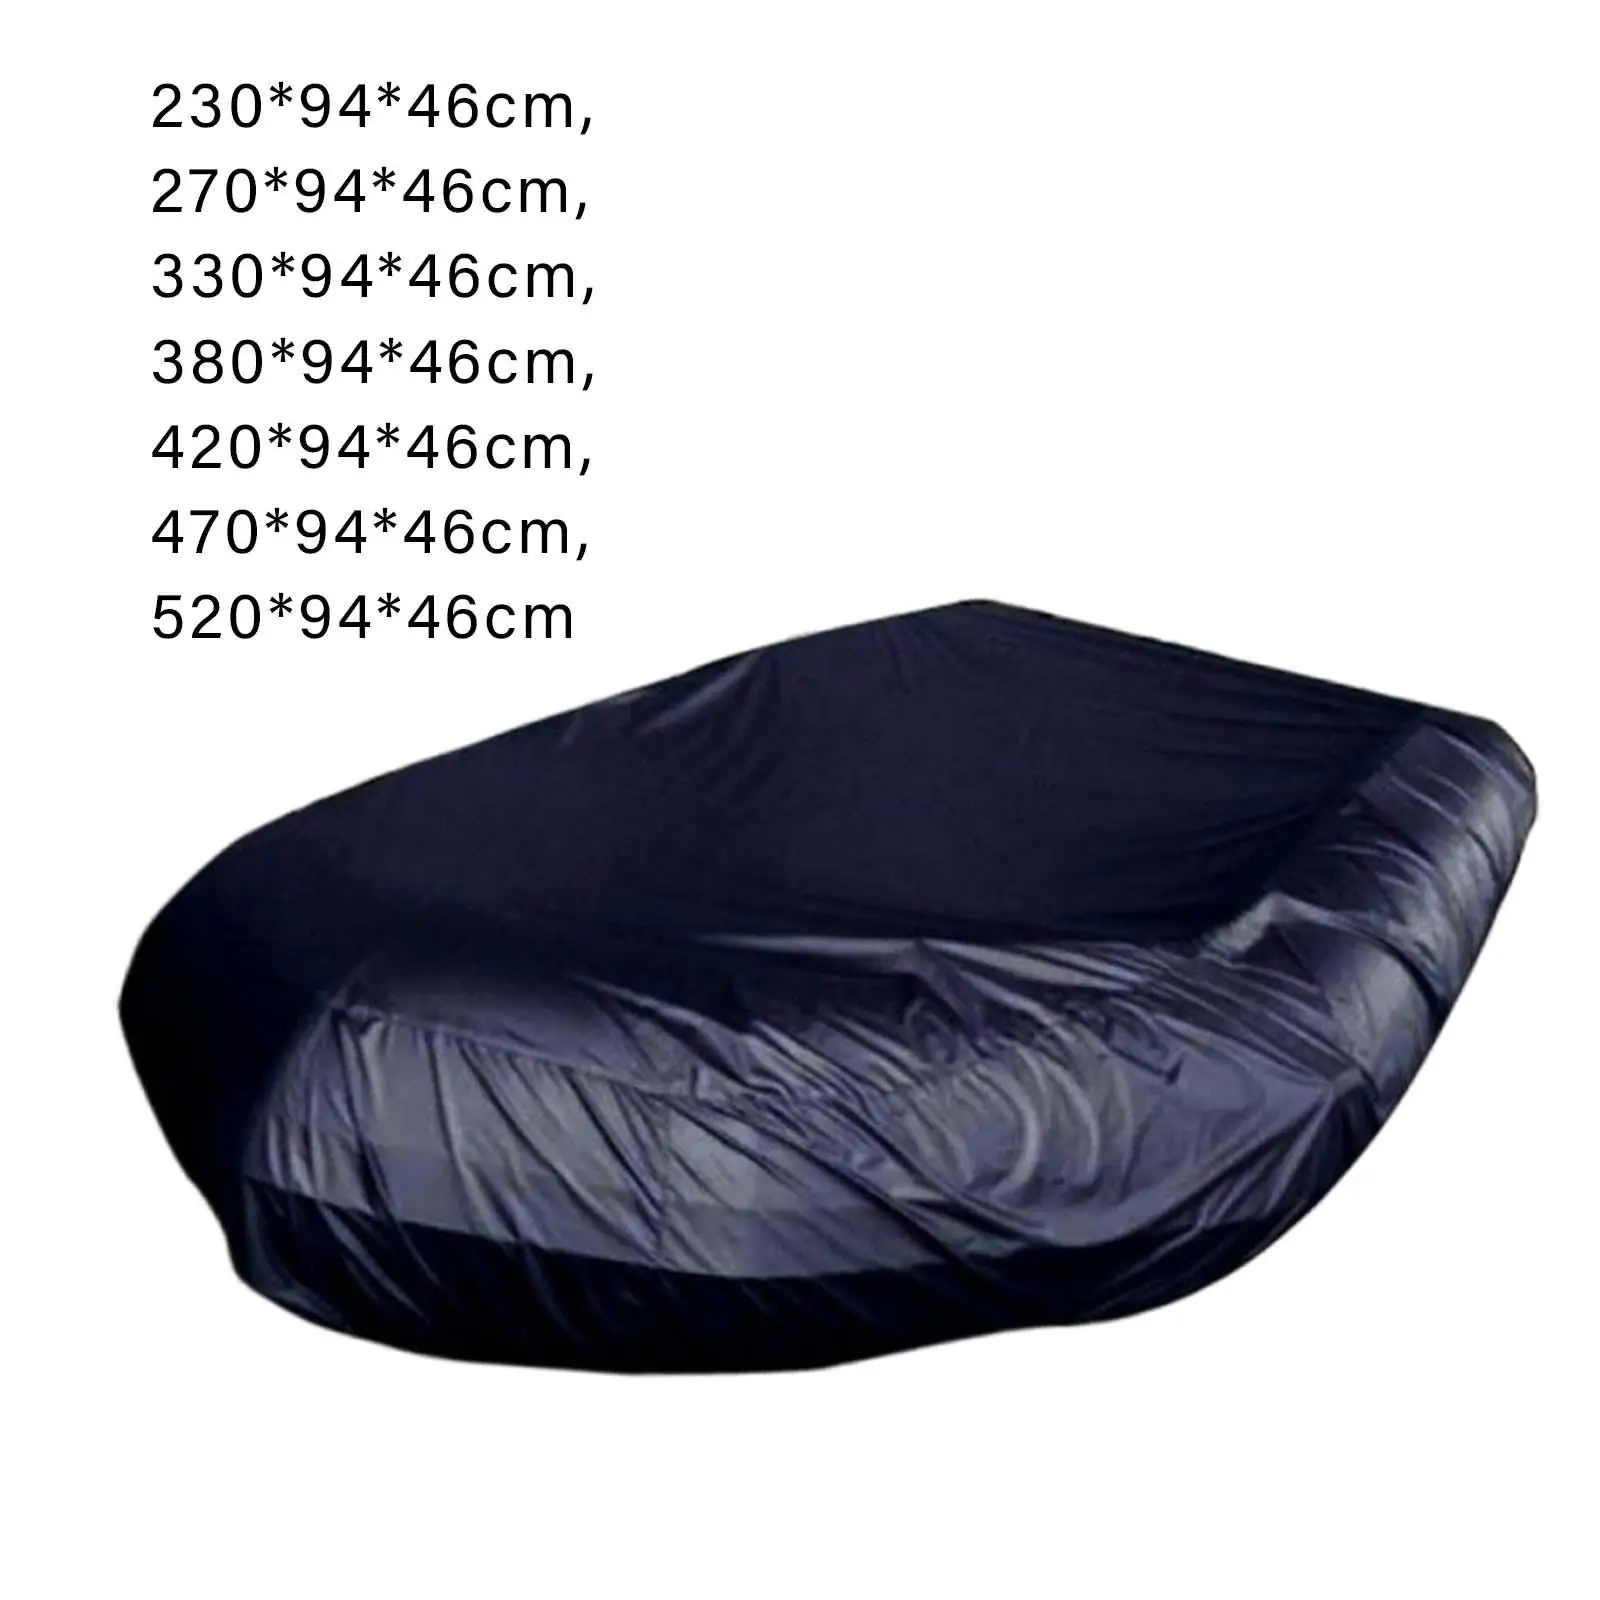 Oxford Kayak Boat Cover with Drawstring Outdoor Storage Protective Waterproof Canoe for Marine Dinghy Inflatable Boat